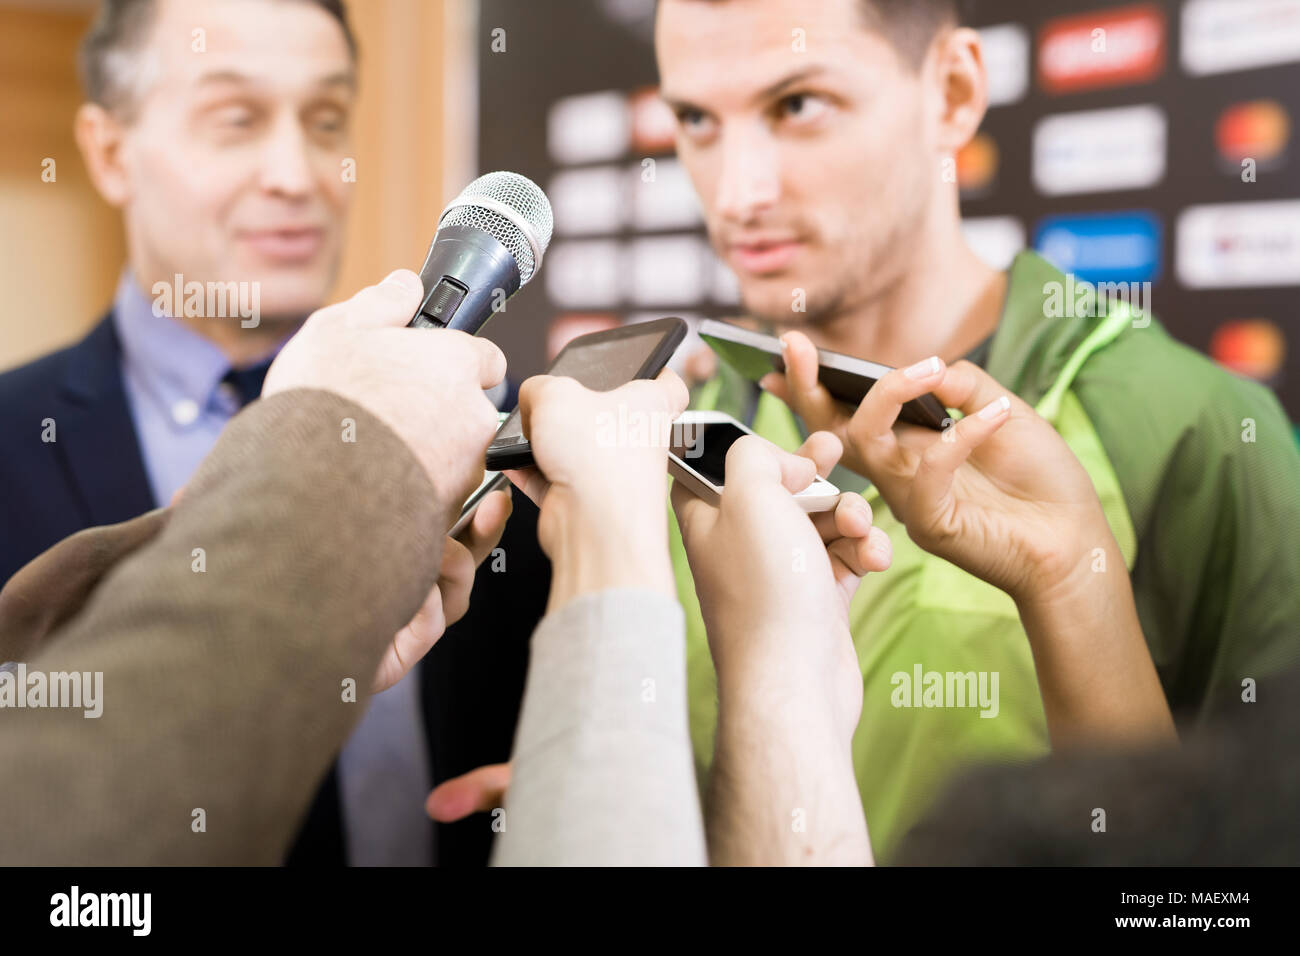 Olympic Athlete Giving Interview Stock Photo